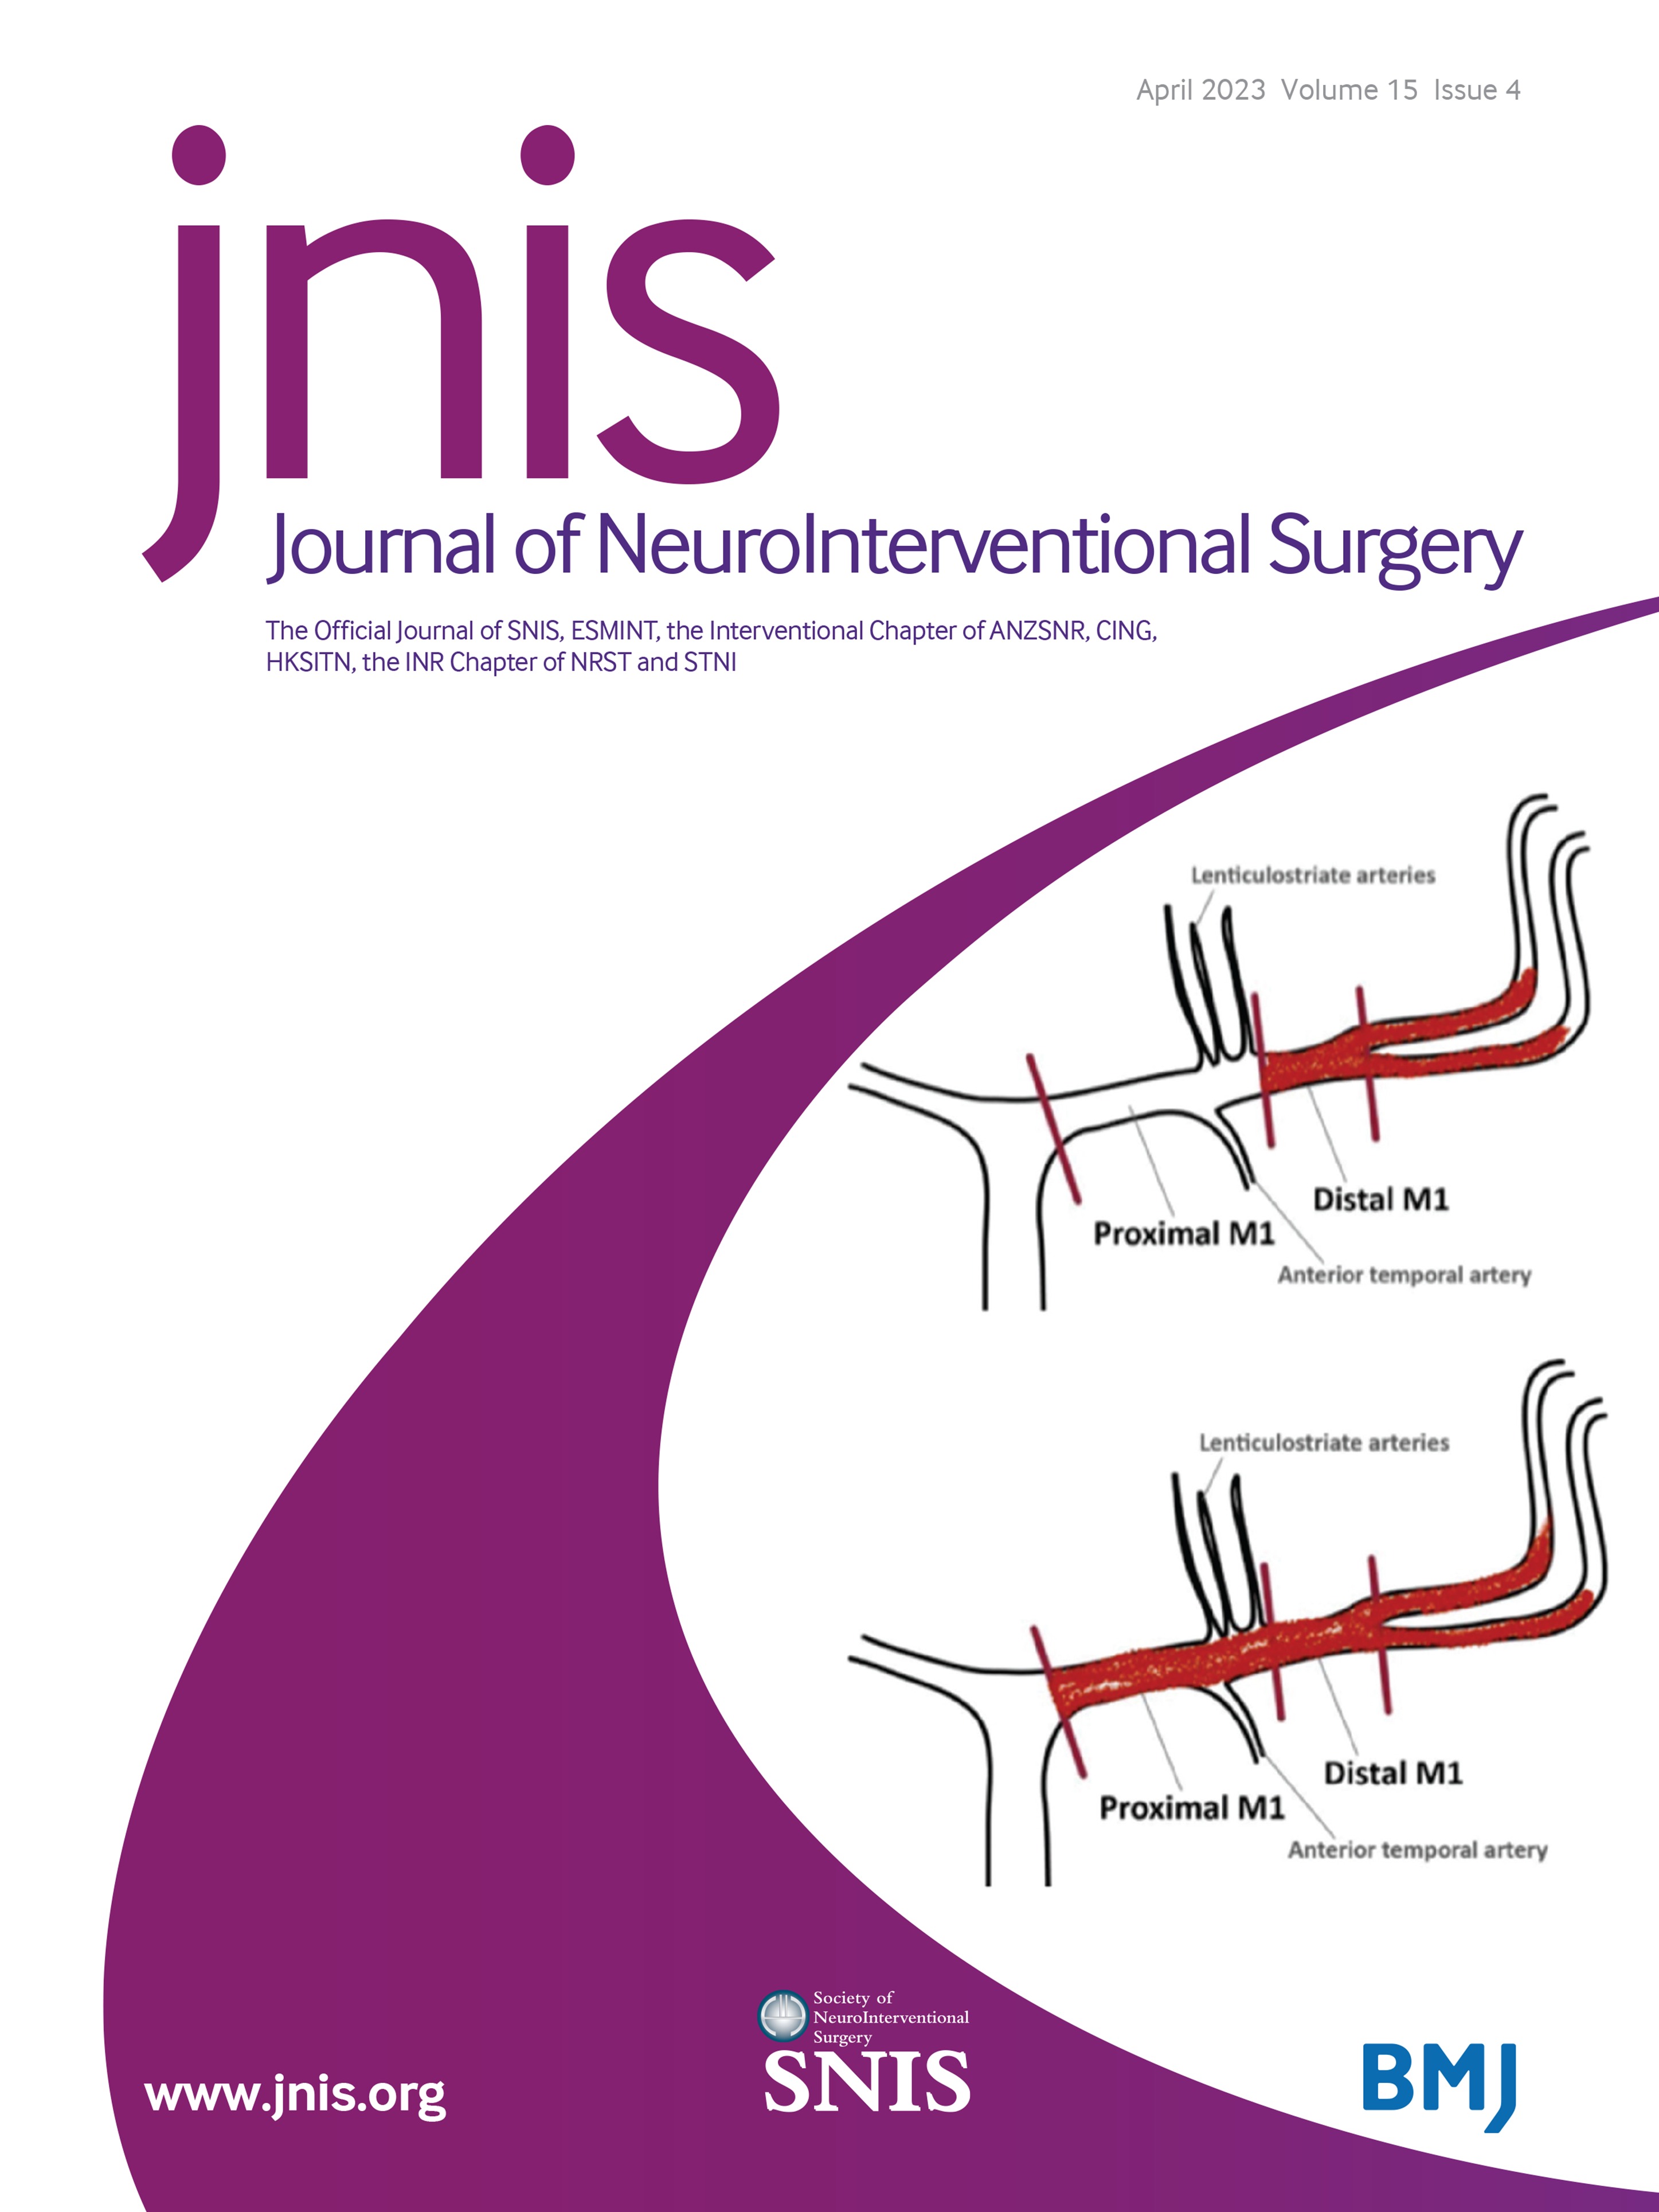 Treatment of fusiform aneurysms with a pipeline embolization device: a multicenter cohort study